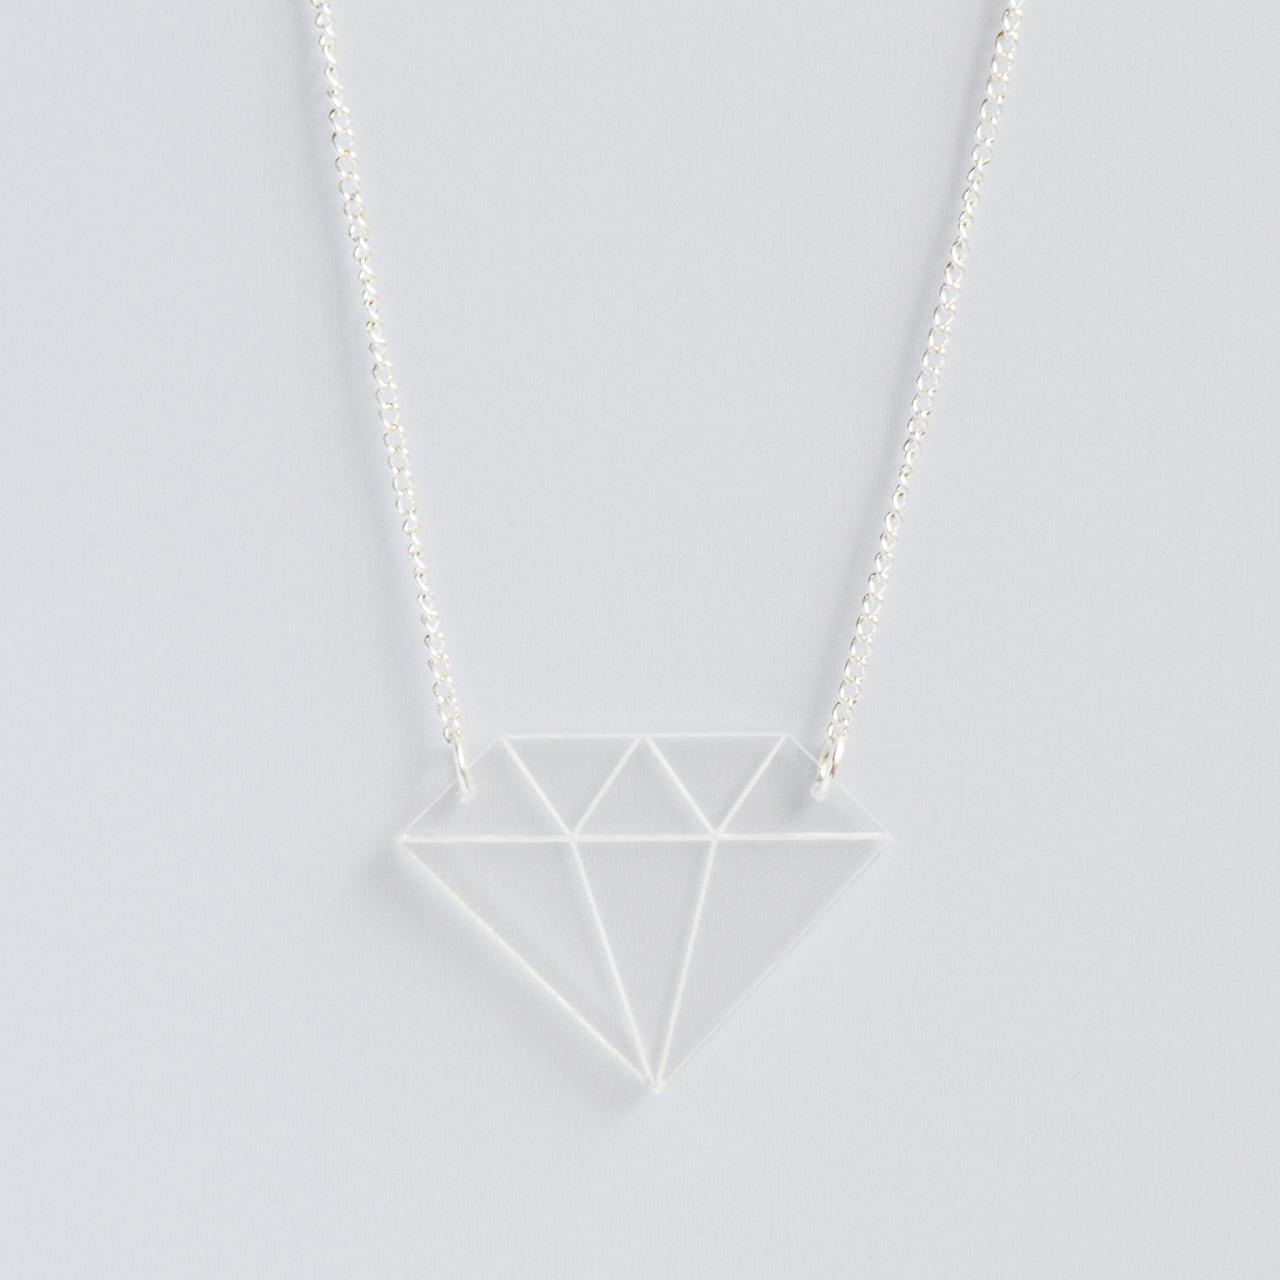 Clear Laser Cut Acrylic Diamond Pendant Necklace On Delicate Curb Chain